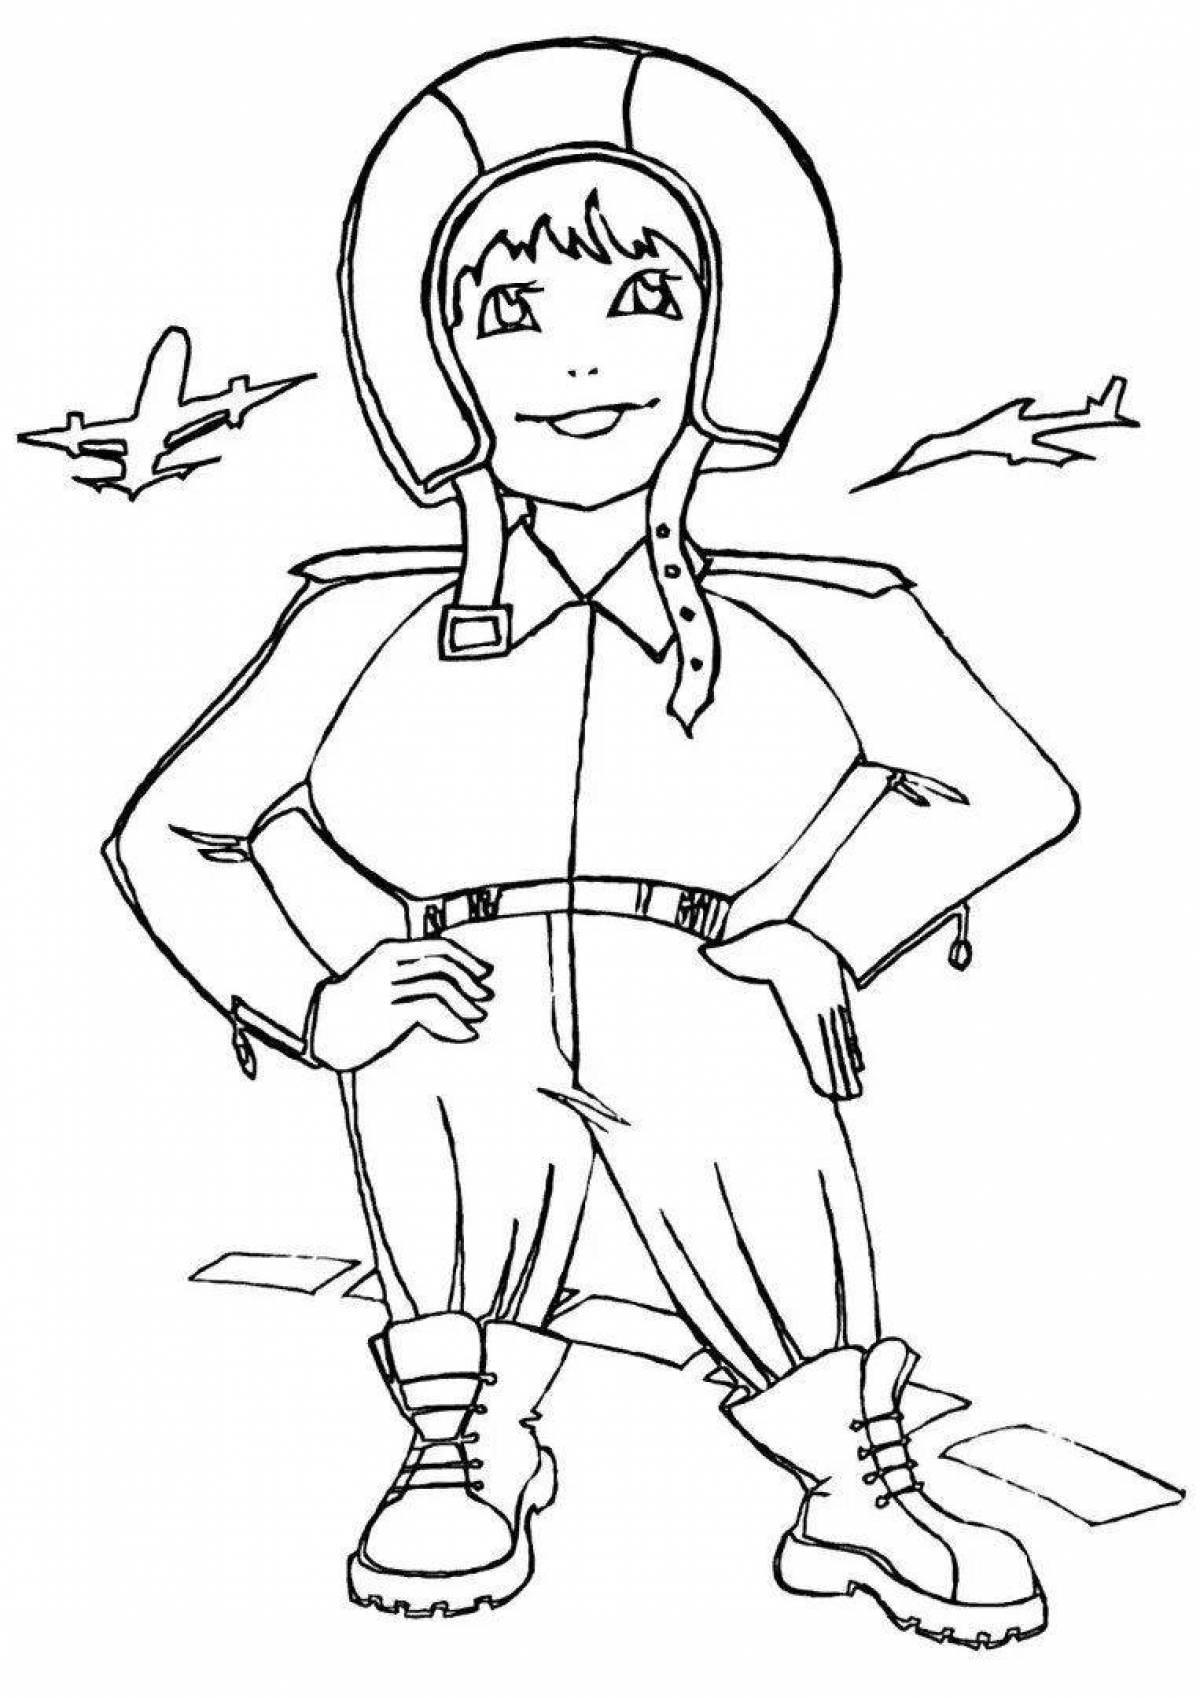 Cute military nurse coloring book for kids